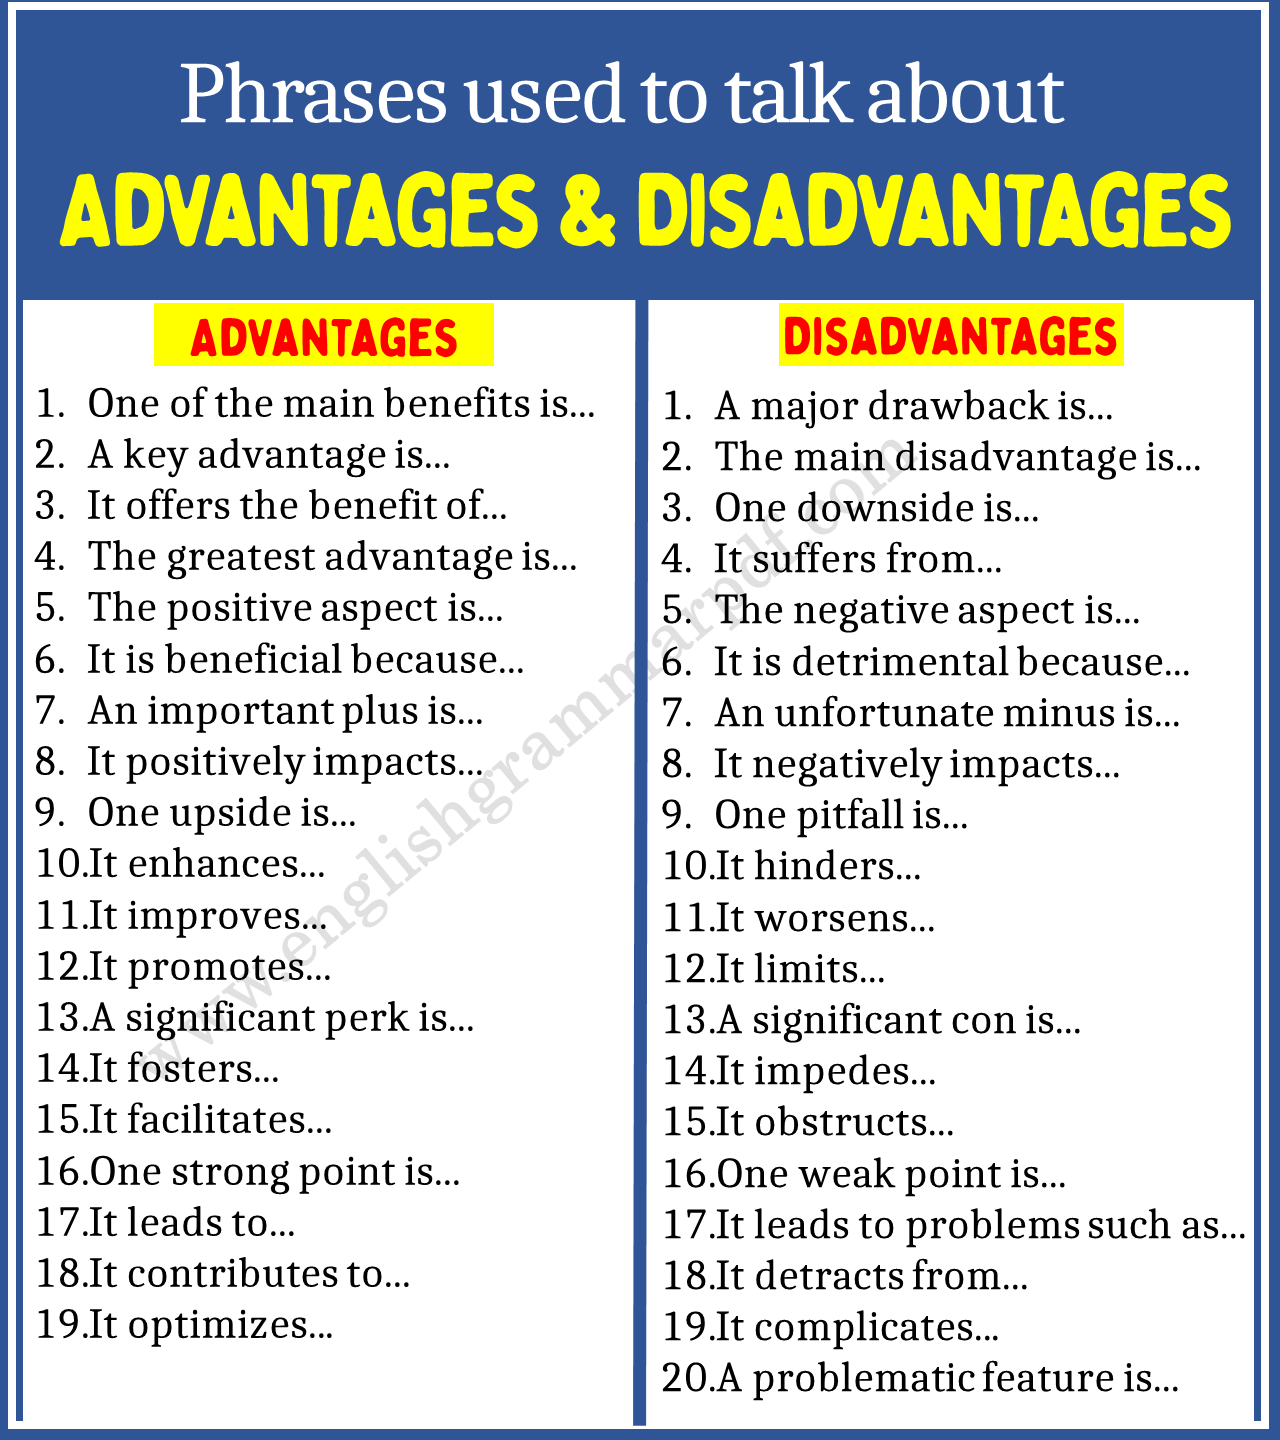 Phrases Used to Talk About Advantages and Disadvantages